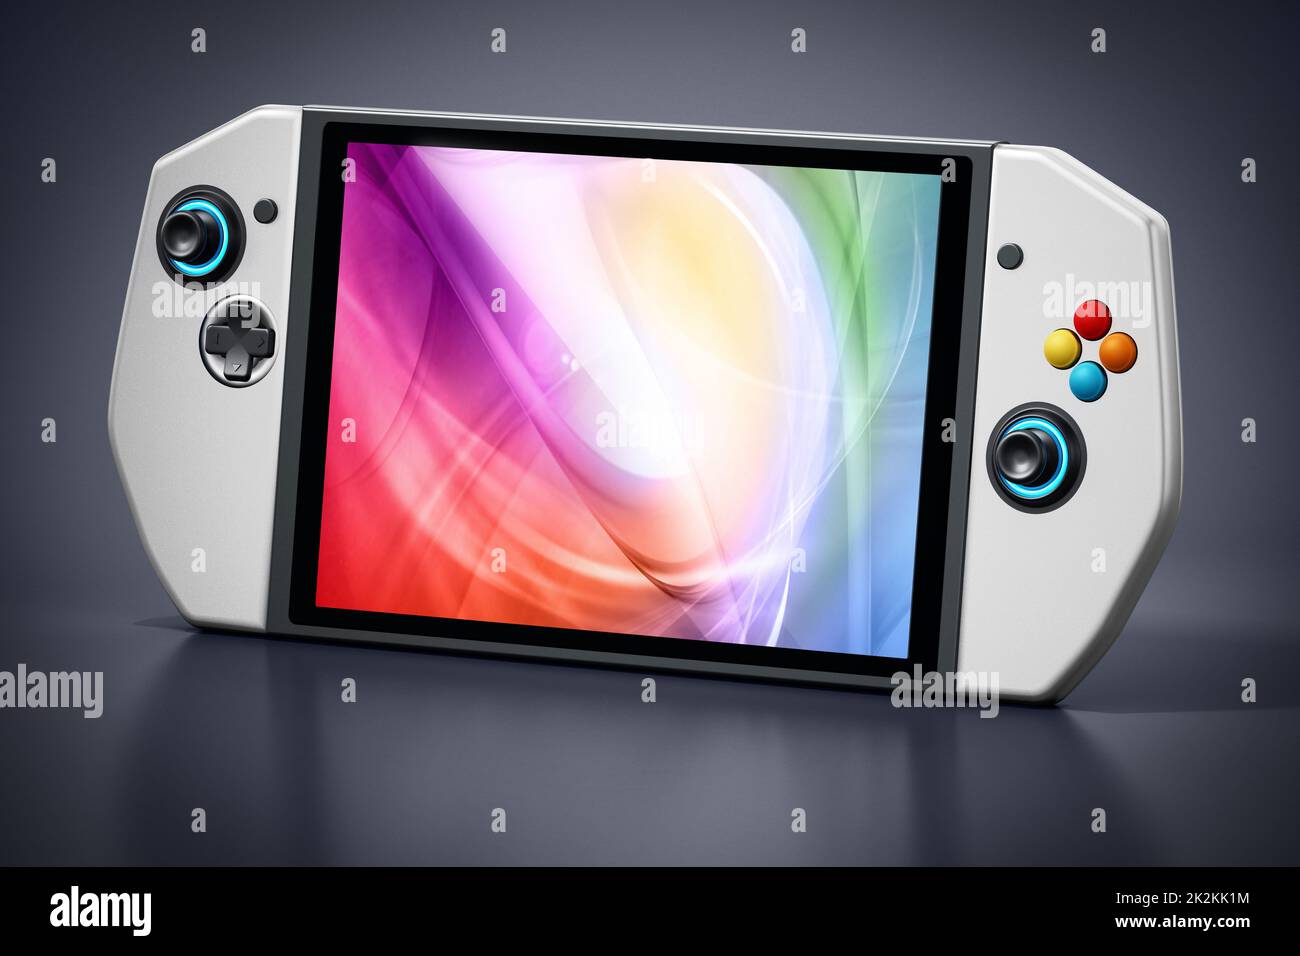 Portable video game console isolated on black background. 3D illustration Stock Photo